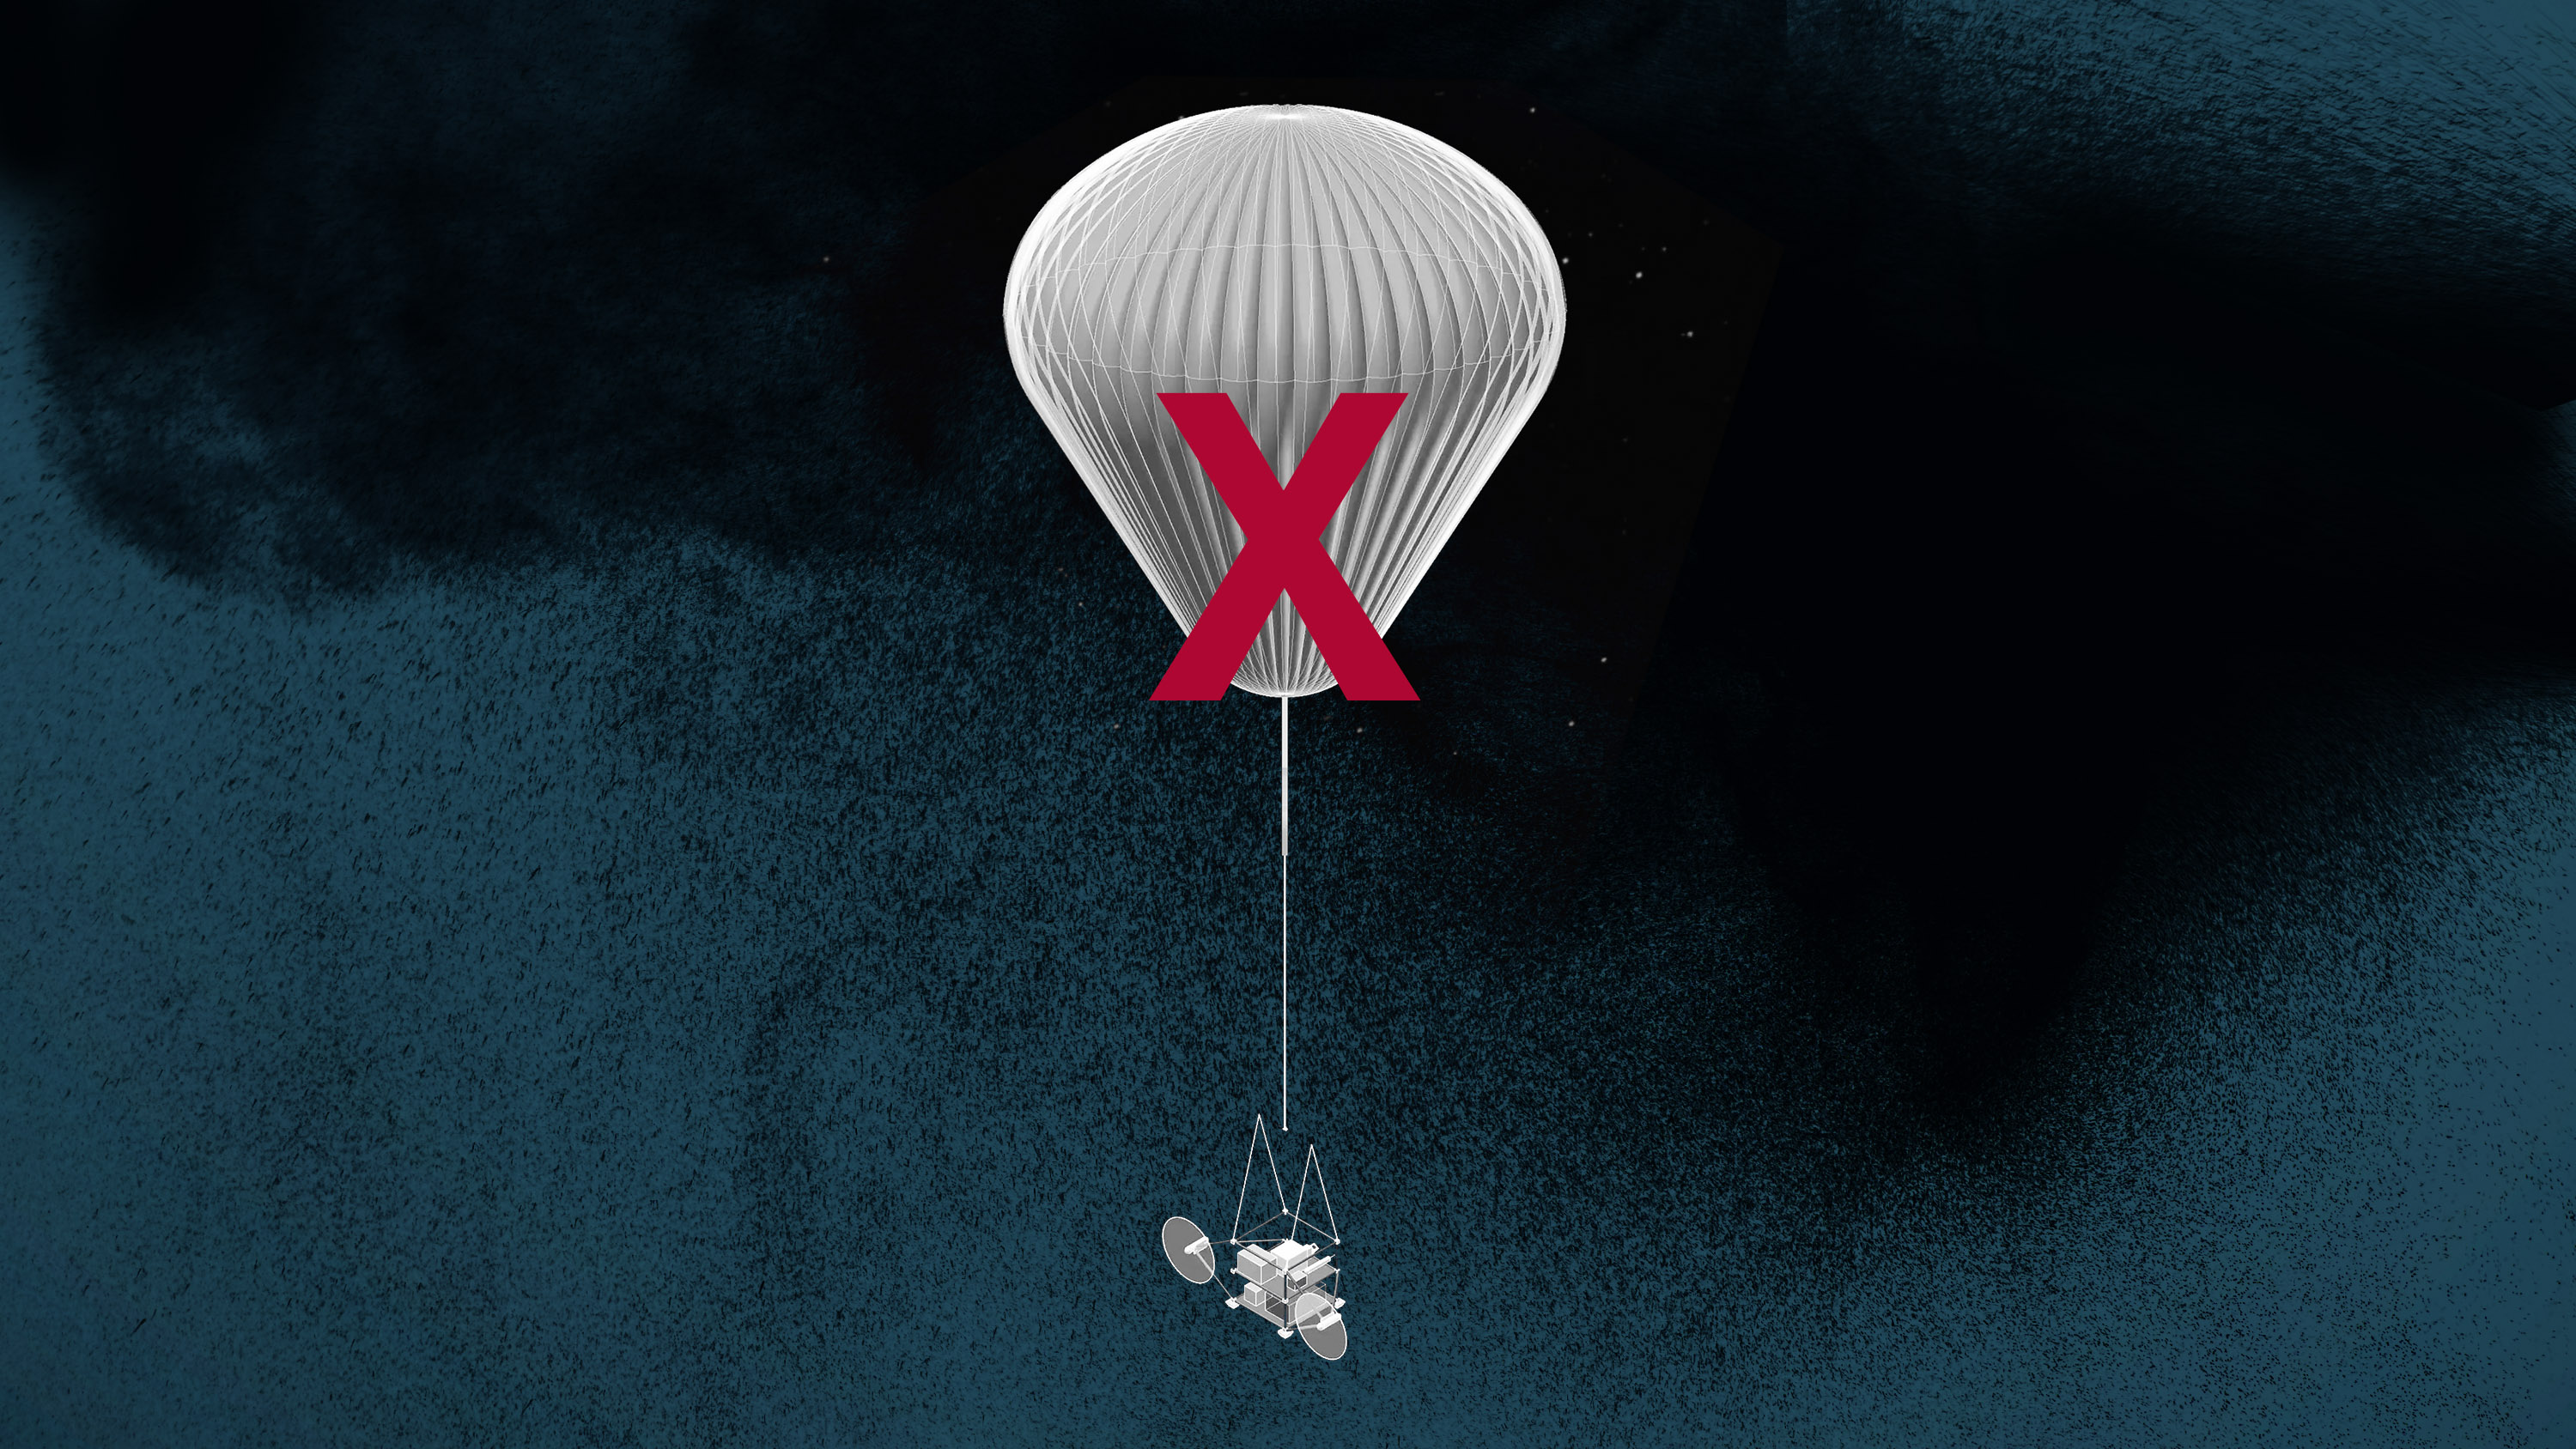 the SCoPEx balloon diagram with a crimson "X" hovers in a blue background with black particles